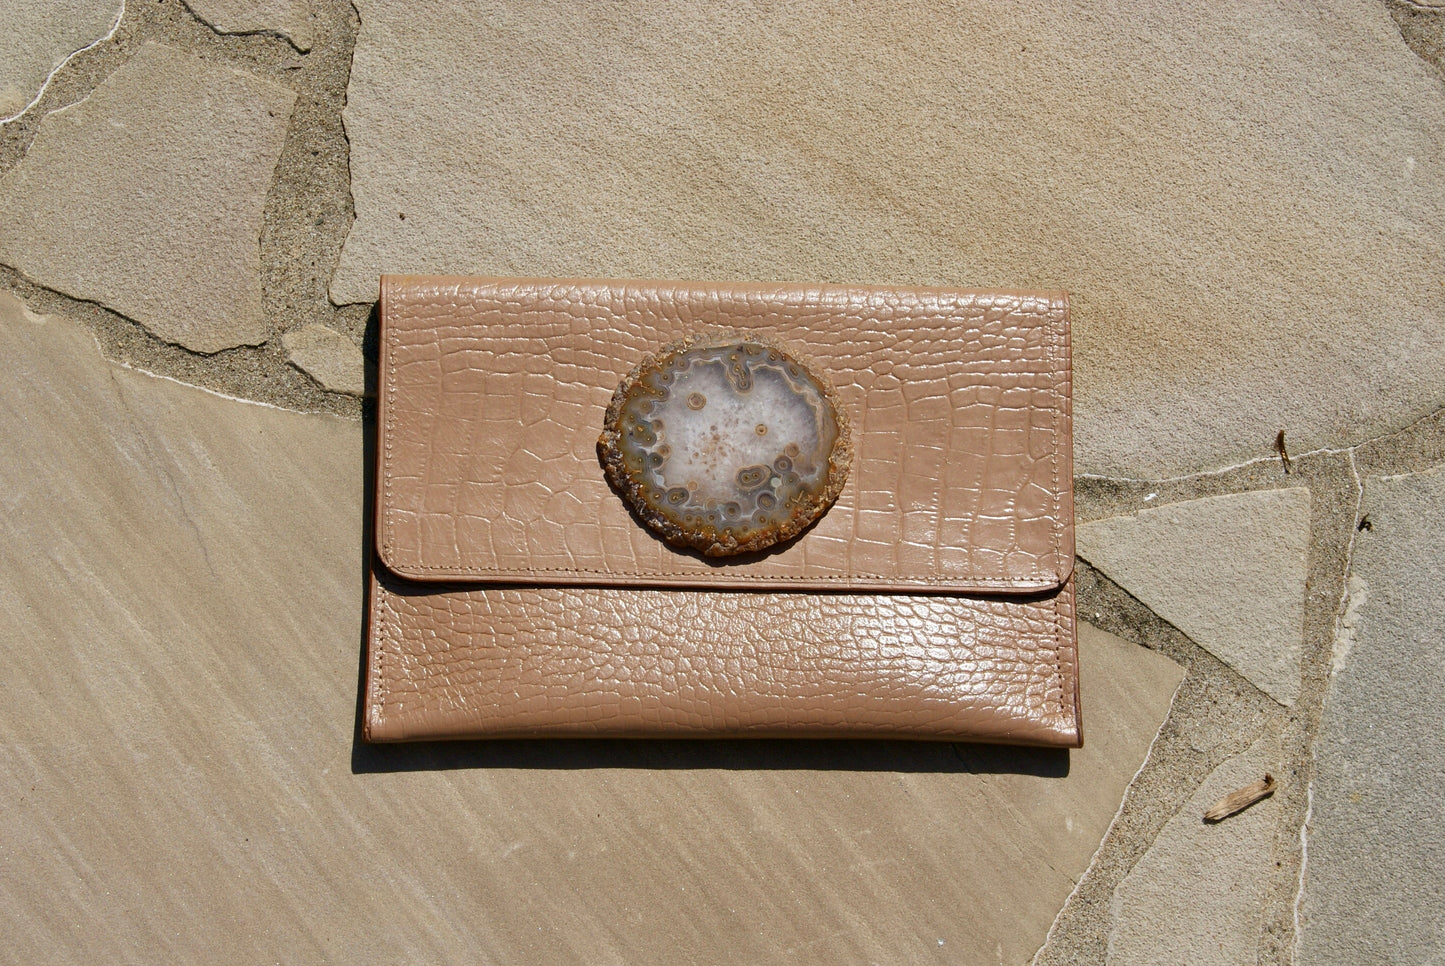 Rosa Clutch in Tan with Large Agate Stone